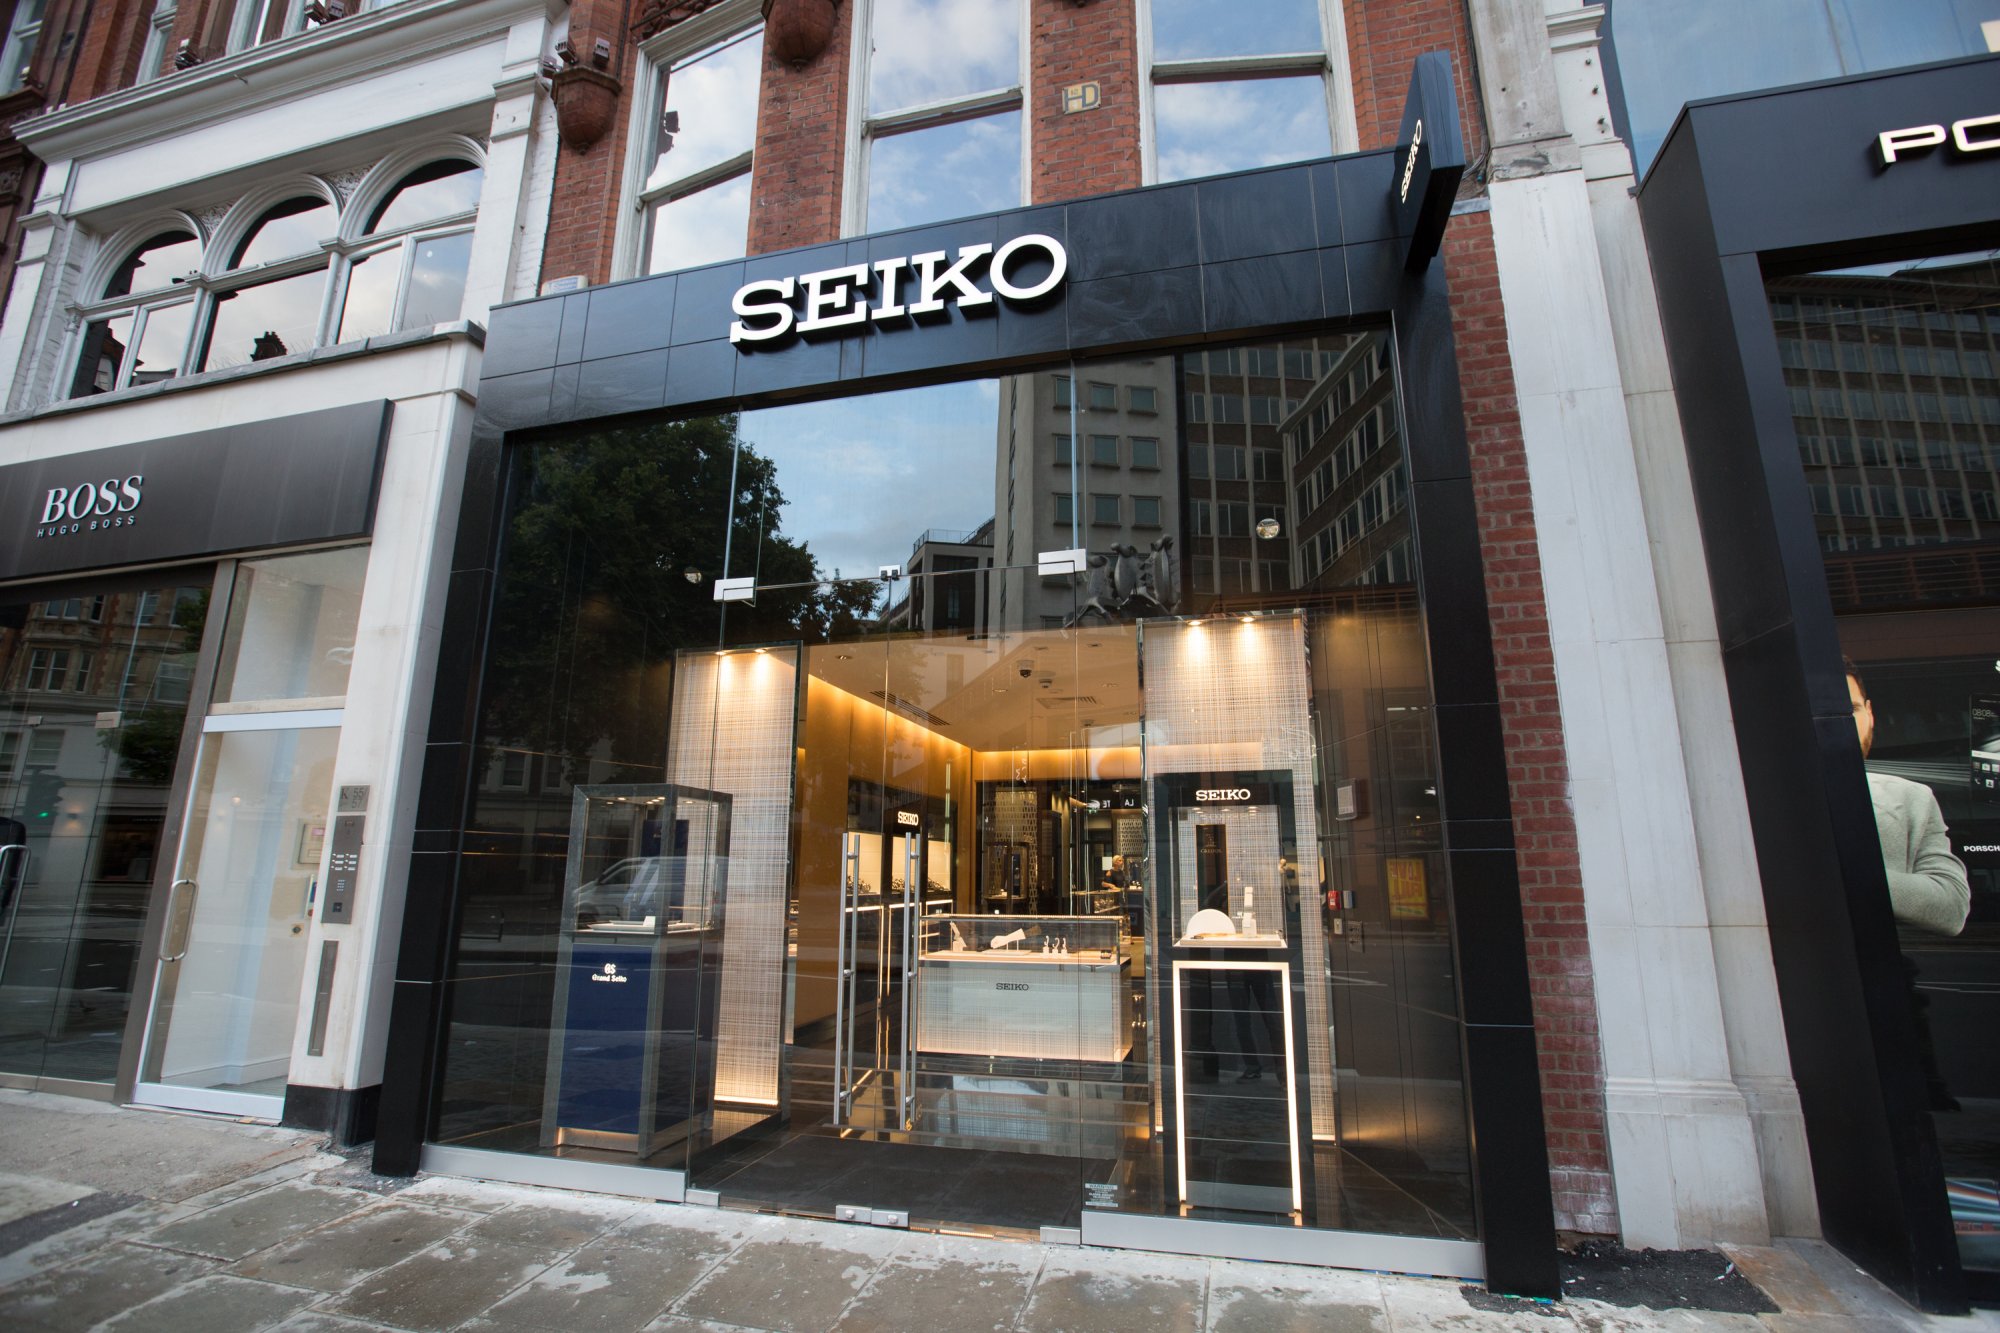 Seiko Opens Its Latest Boutique in Heart of London | Seiko Watchのプレスリリース |  共同通信PRワイヤー